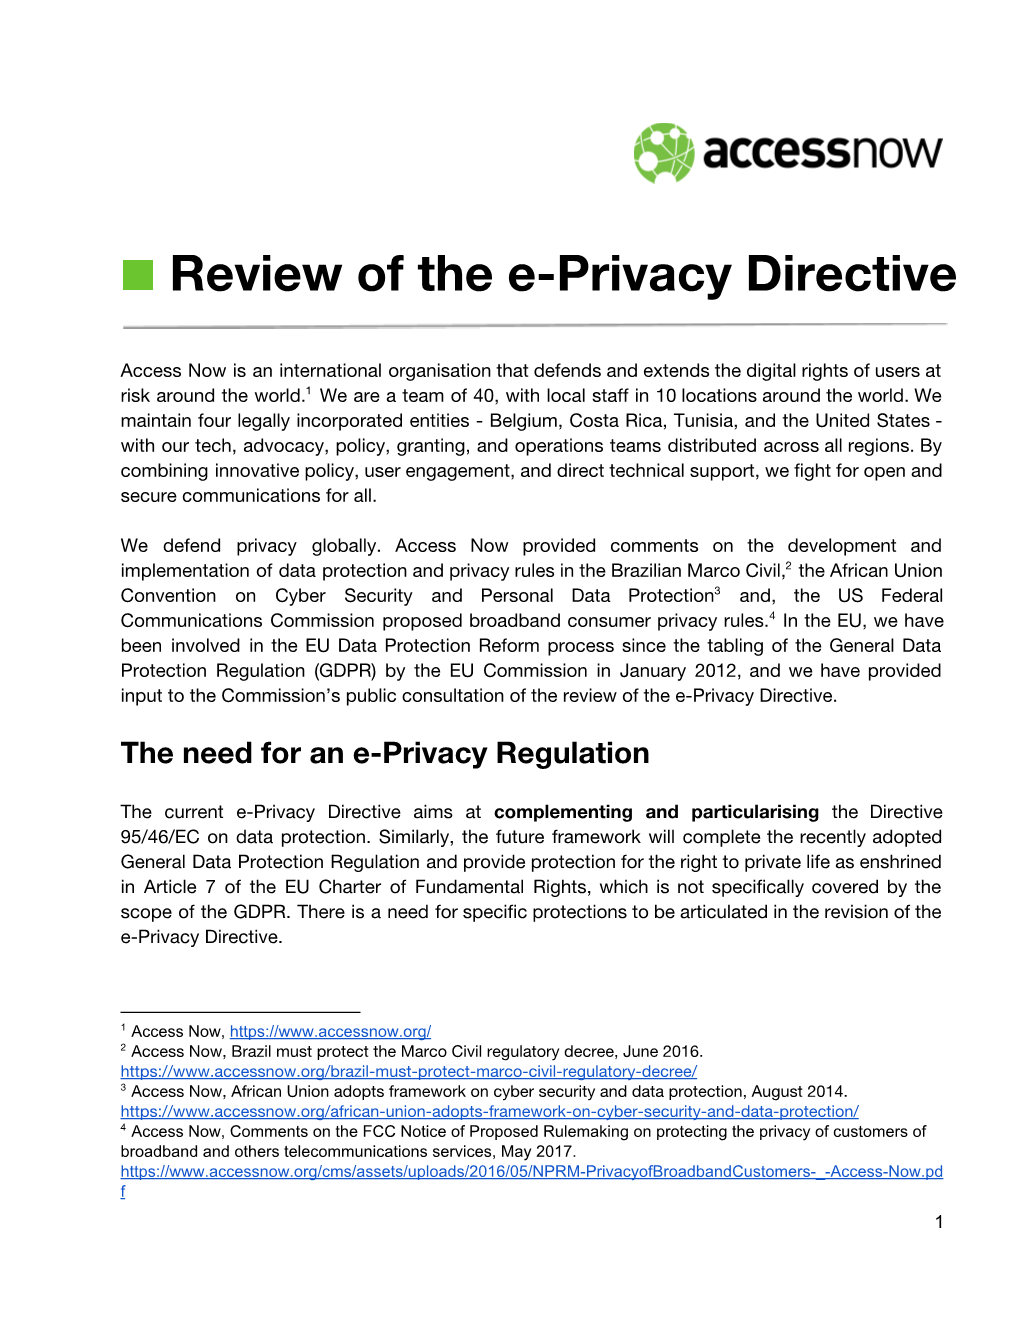 Review of the E-Privacy Directive